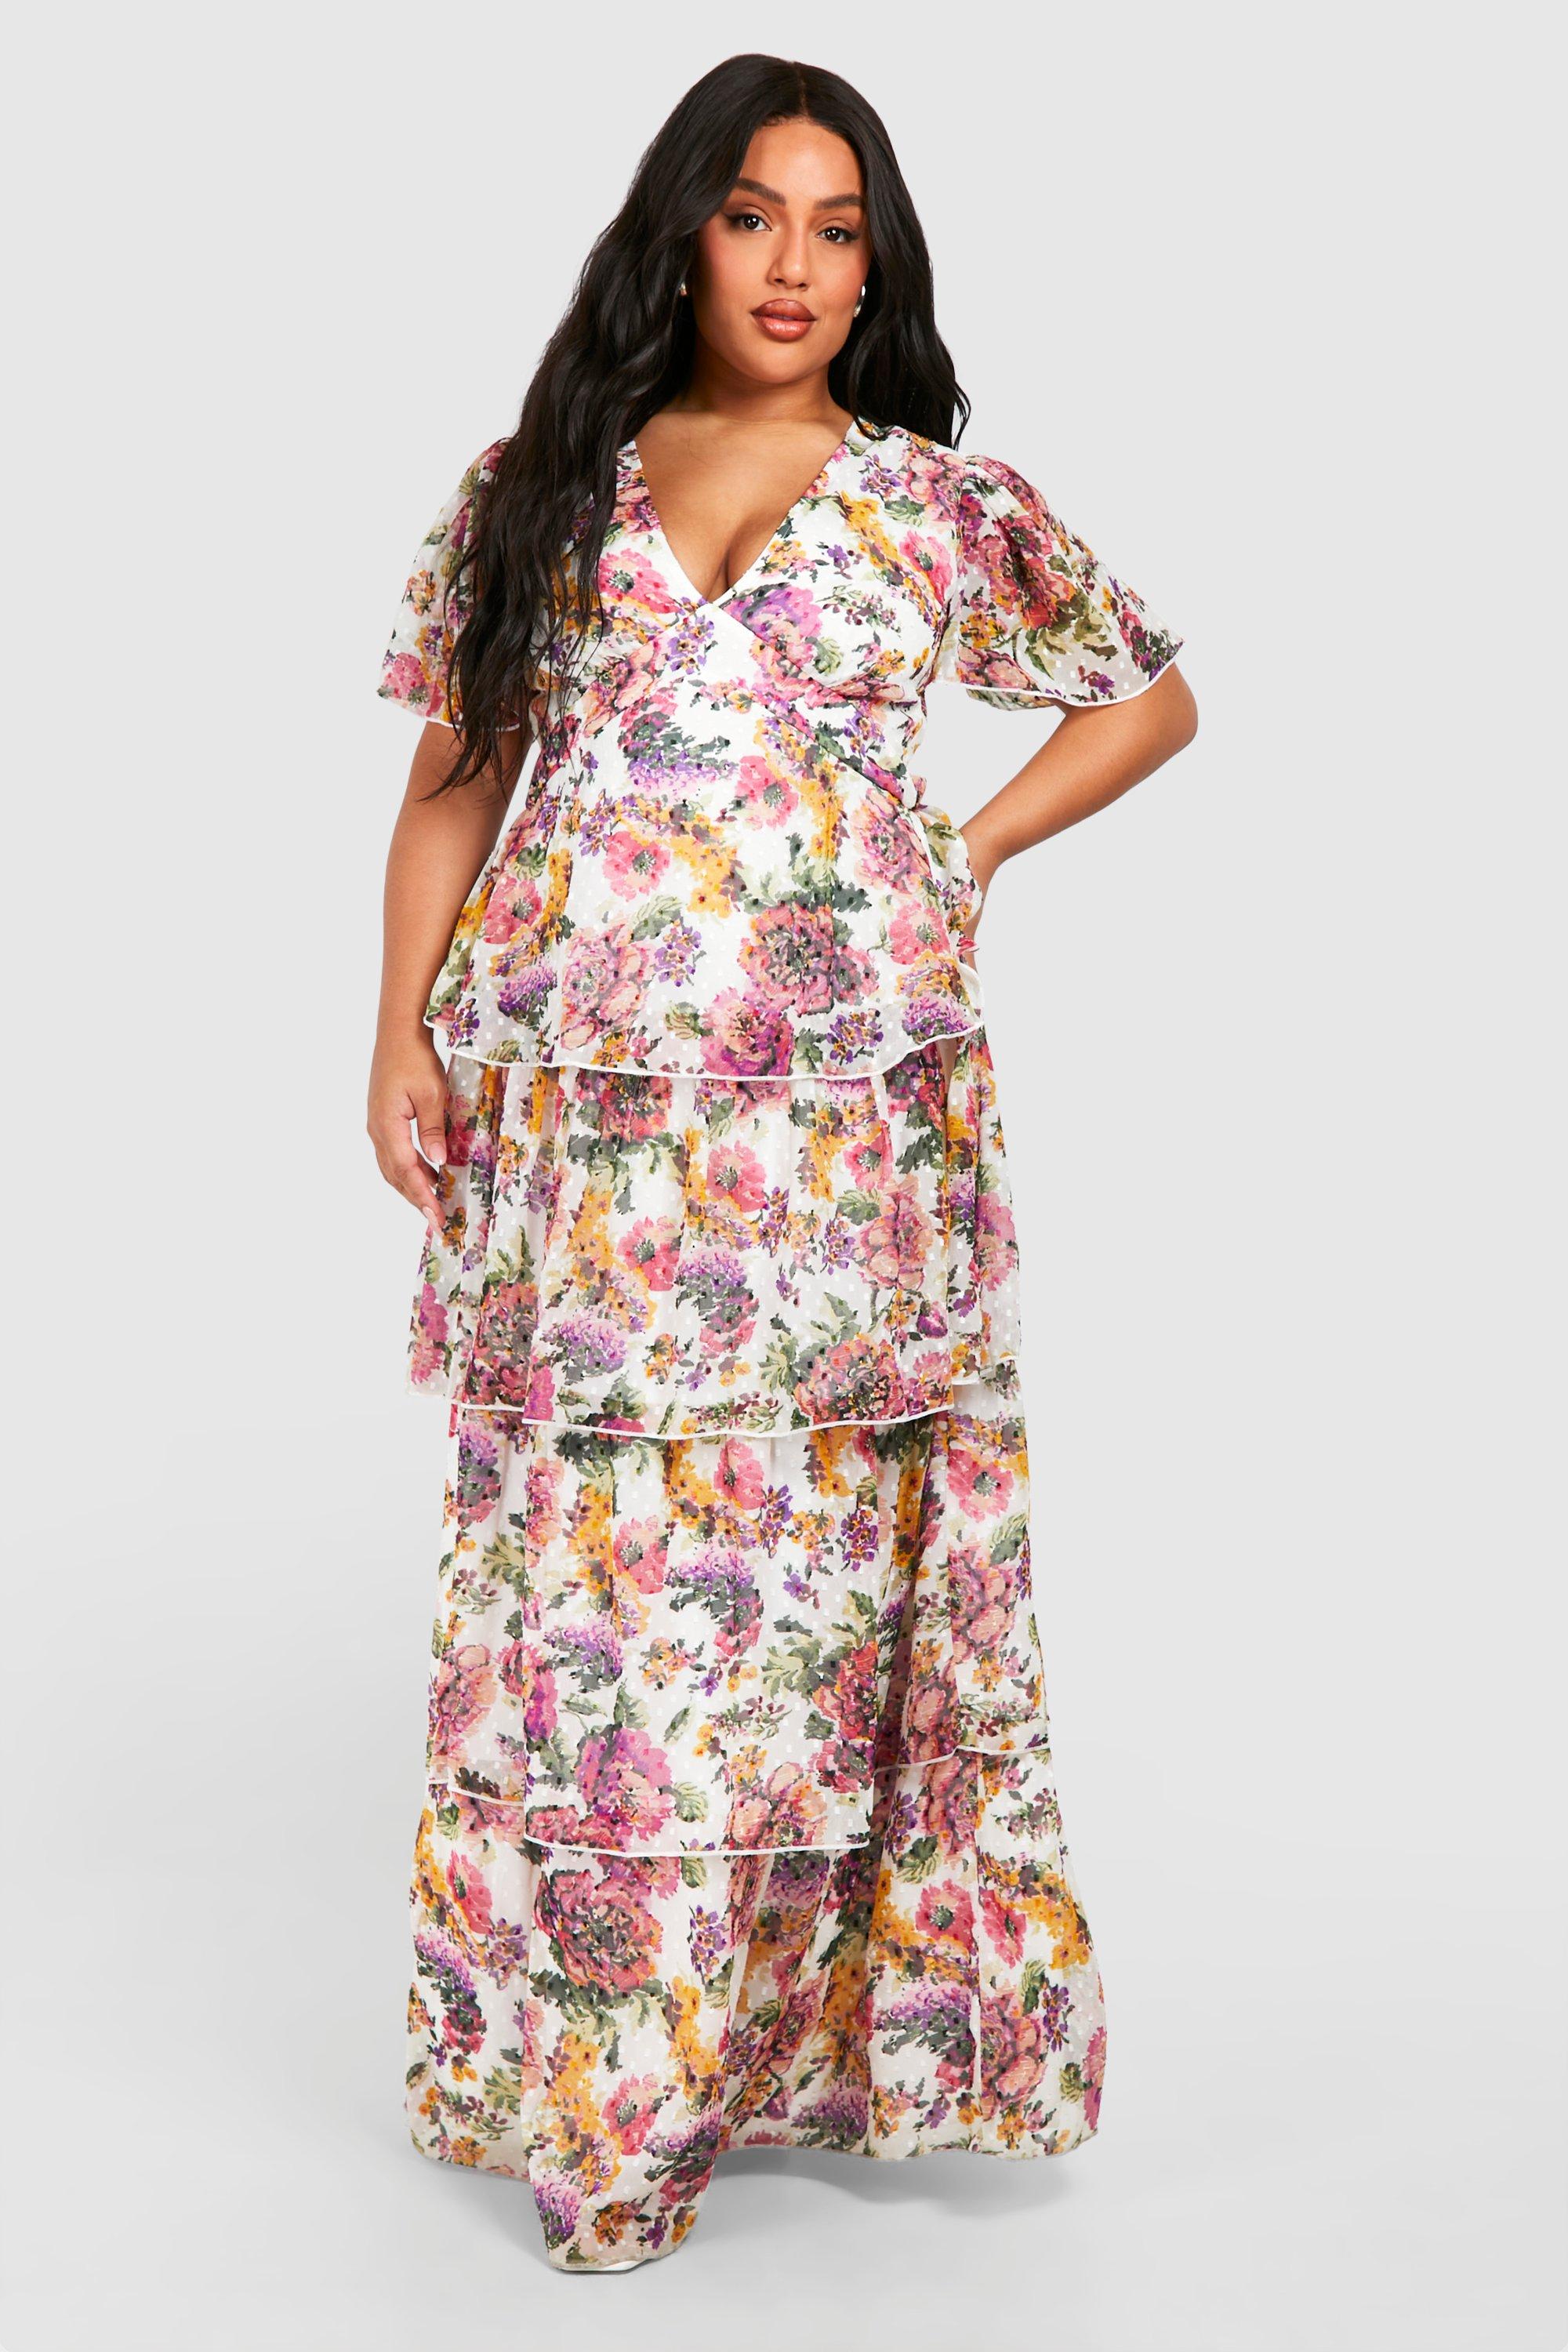 Boohoo Plus Woven Floral Print Angel Sleeve Tiered Maxi Dress, Pink